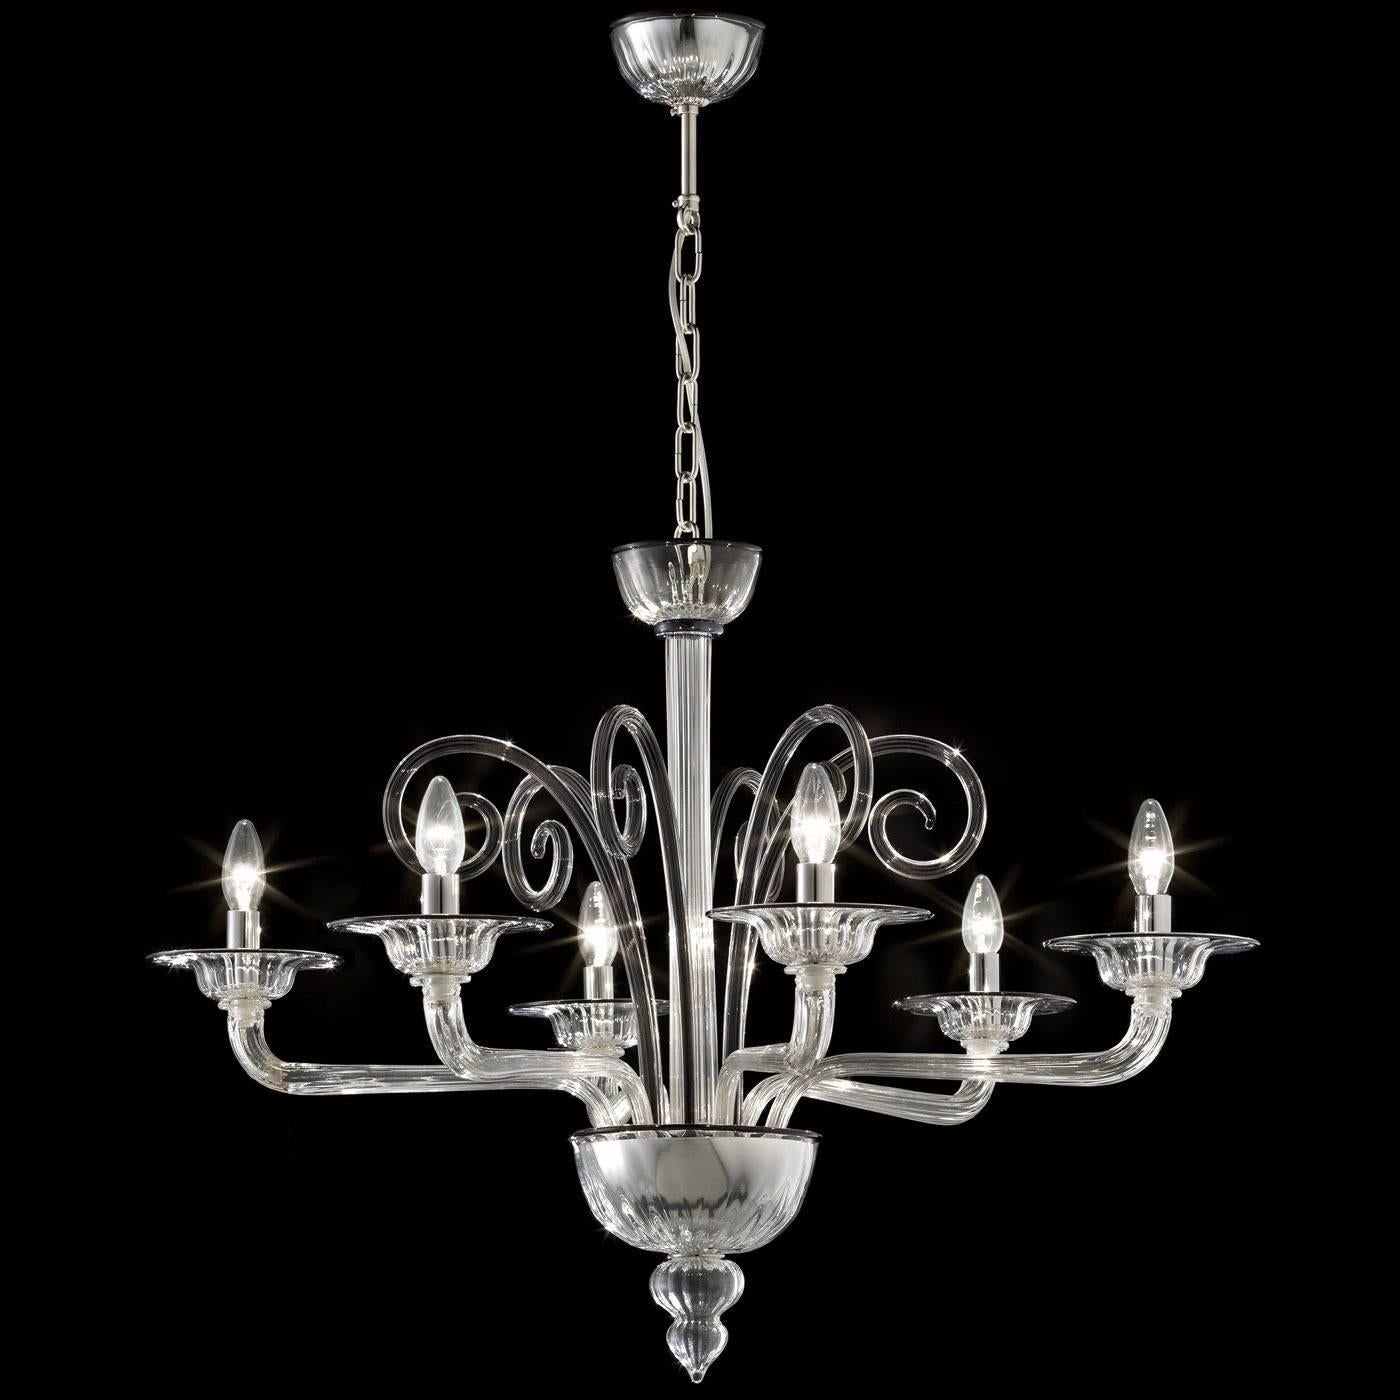 This elegant chandelier in Murano glass is entirely mouth-blown and features six elongated arms each supporting a light with a simple array of glass curls at the top.